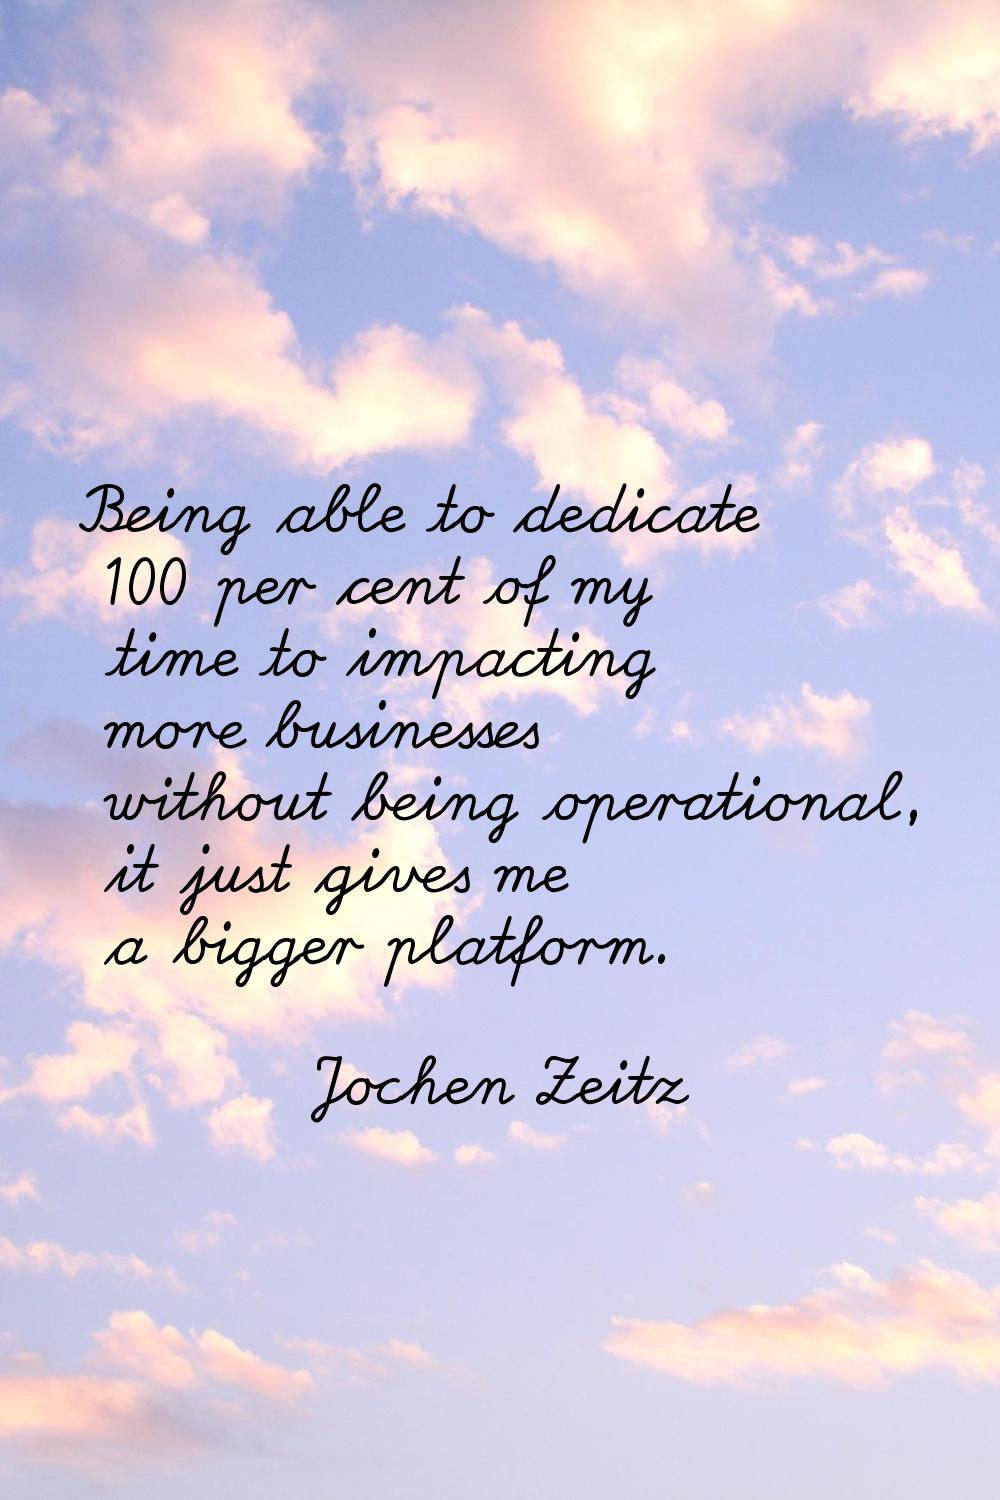 Being able to dedicate 100 per cent of my time to impacting more businesses without being operation